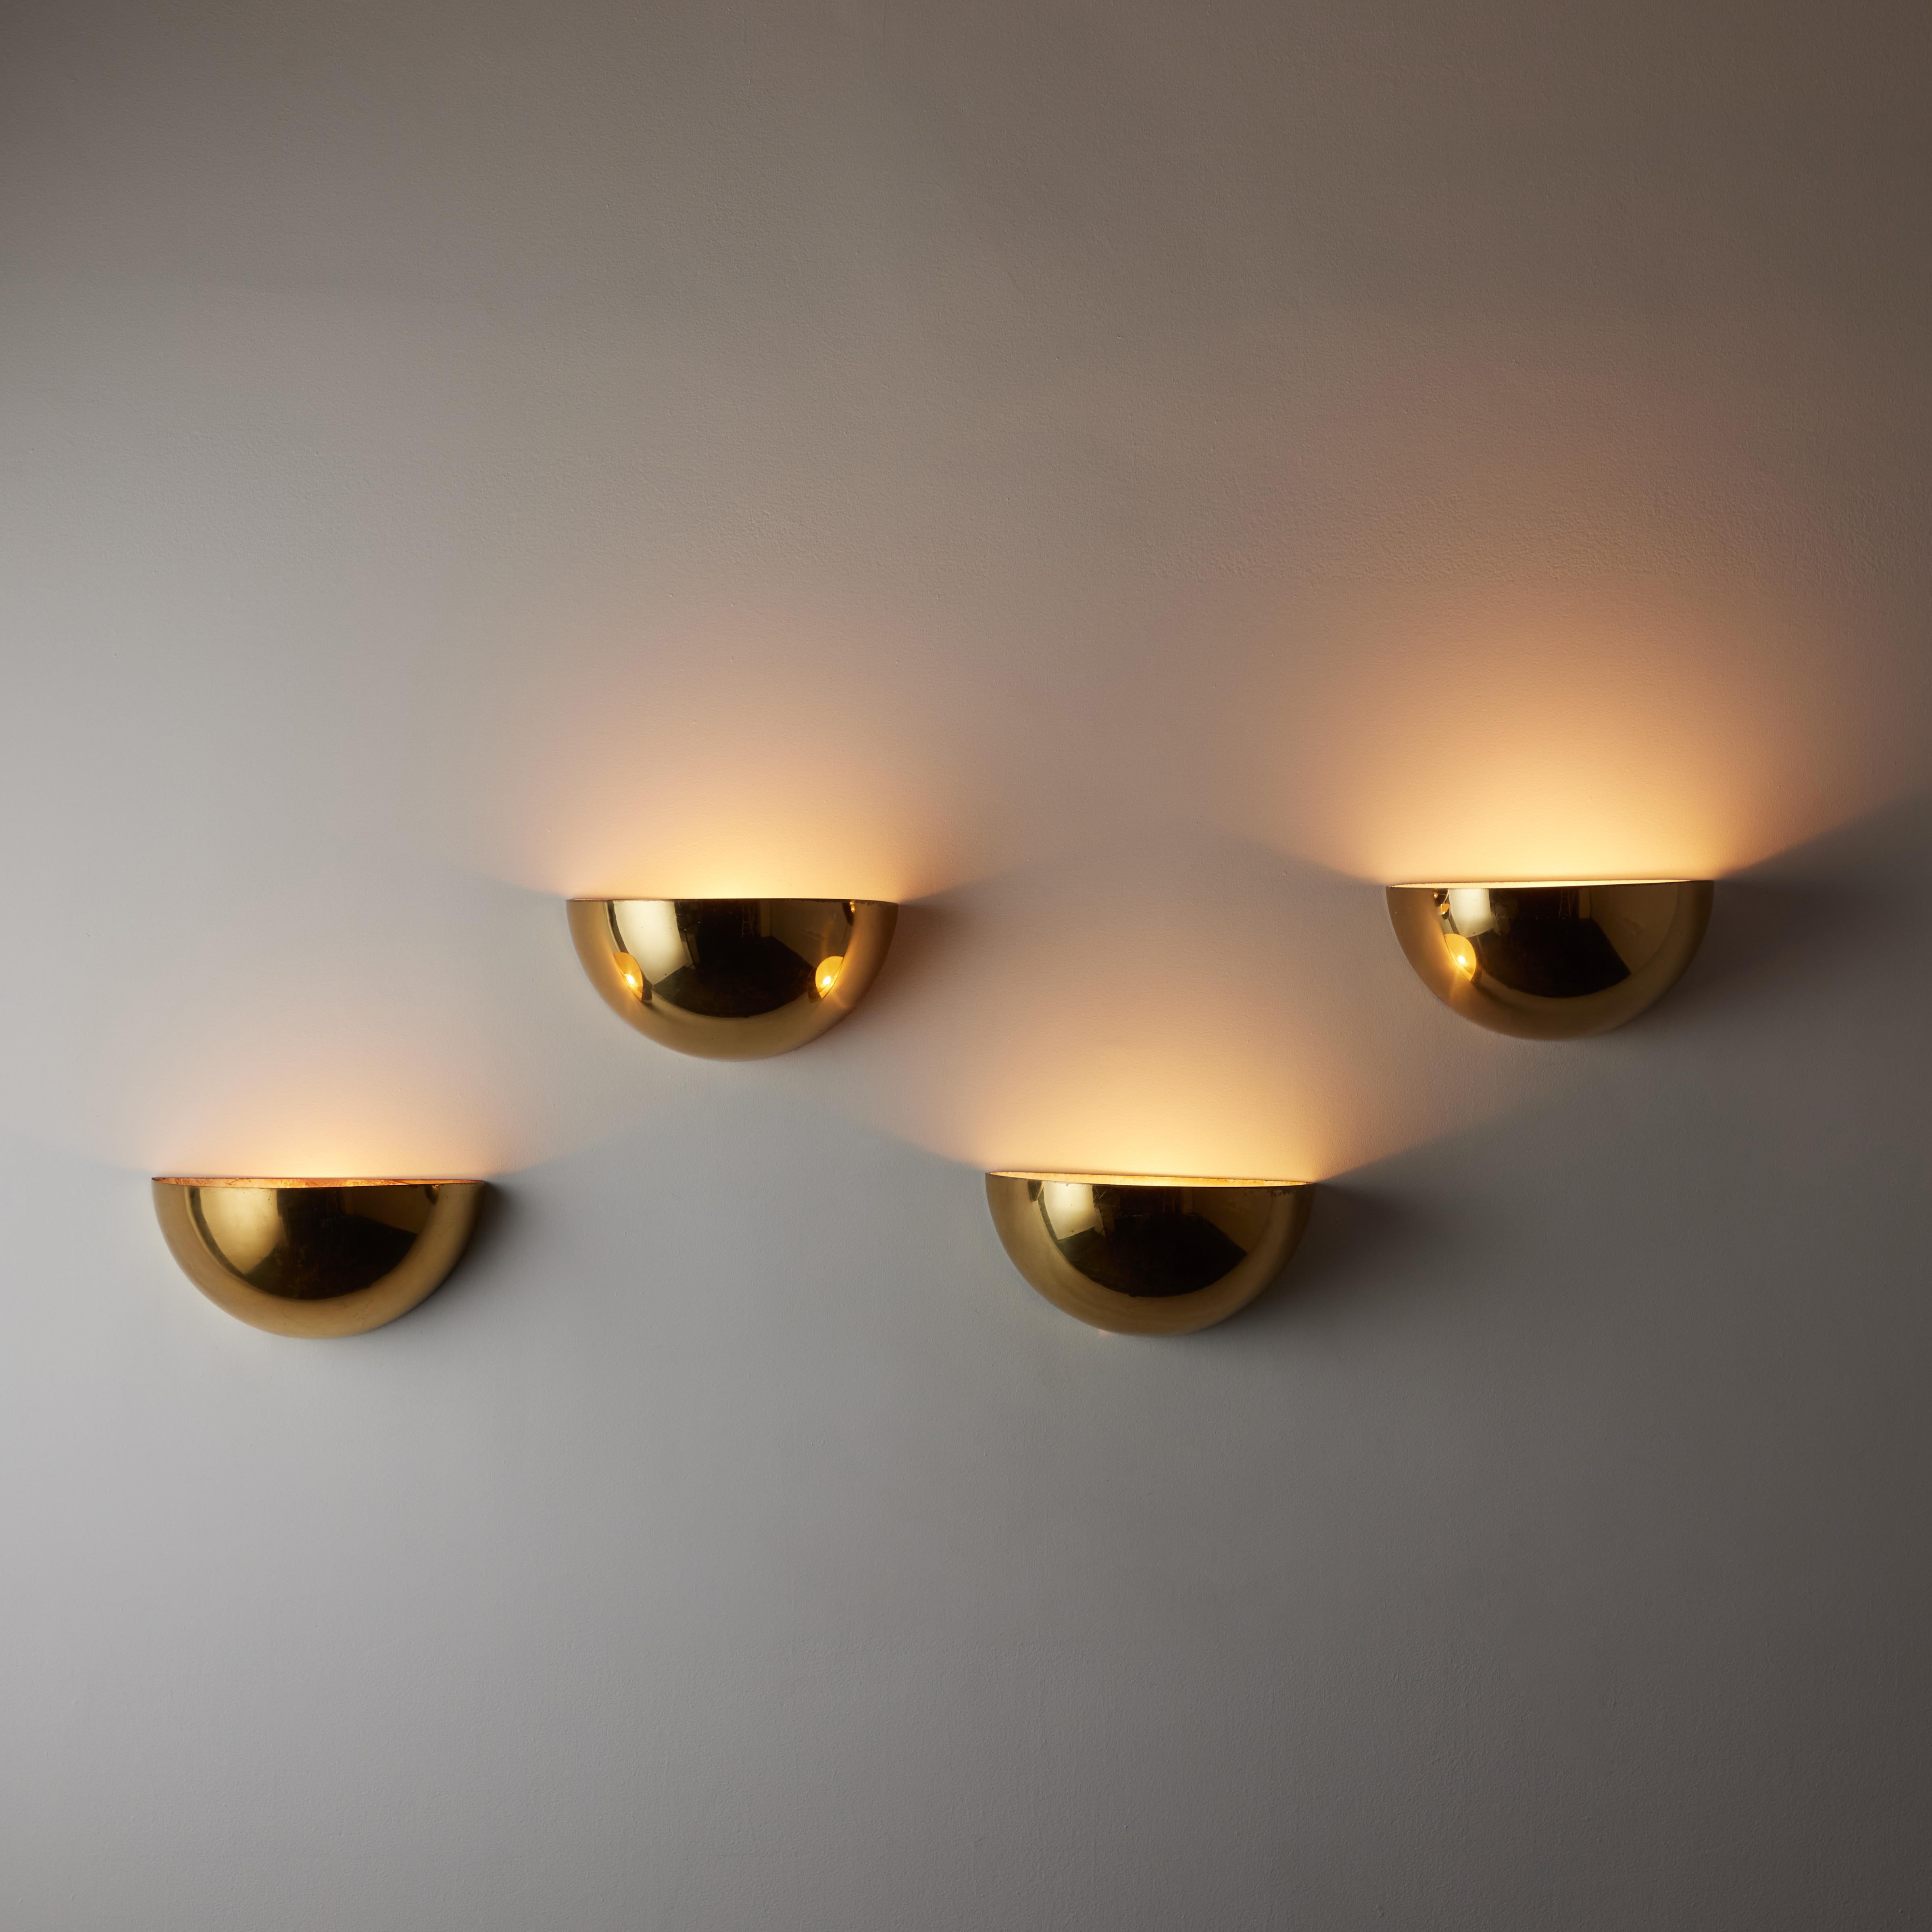 'Quebec' Sconces by Gilla Giani for Tronconi. Designed and manufactured in Italy, circa the 1980s. Half Dome shells in a beautifully aged polished brass. Each sconce holds a single E27 socket type, adapted for the US. We recommend a 40-60w max bulb